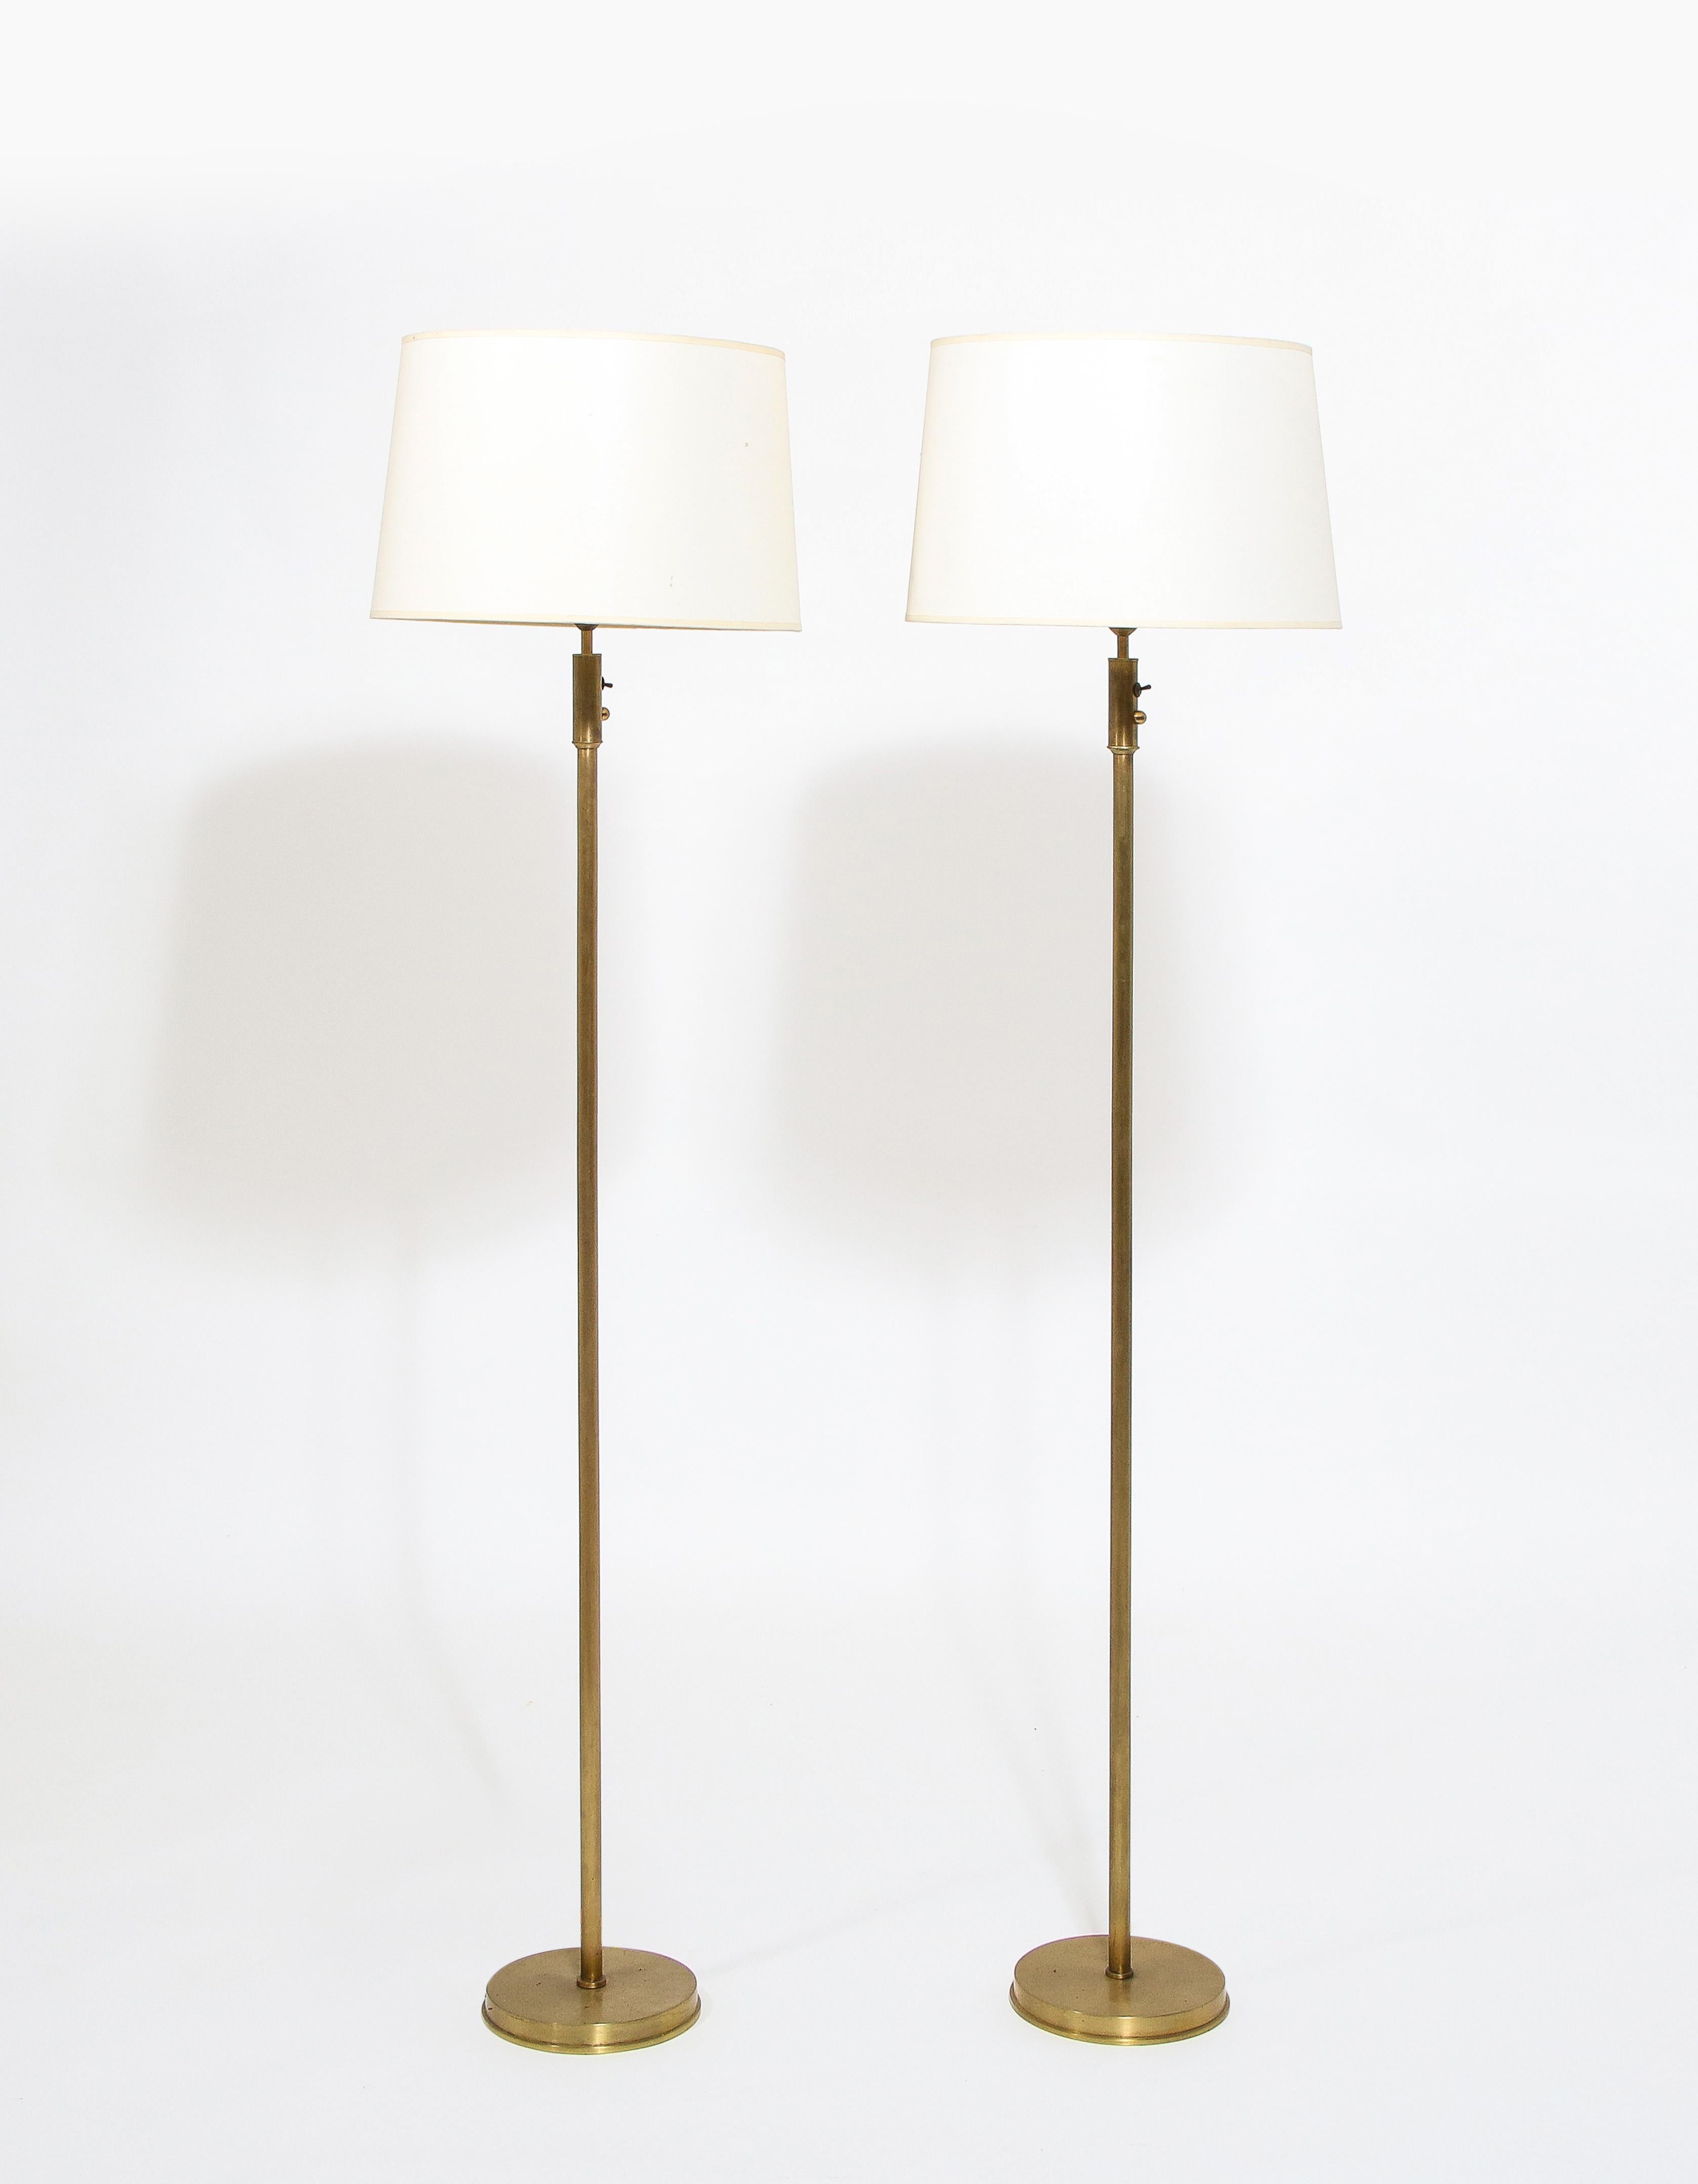 Pair of Brushed Brass Floor Lamps, France 1960's For Sale 2